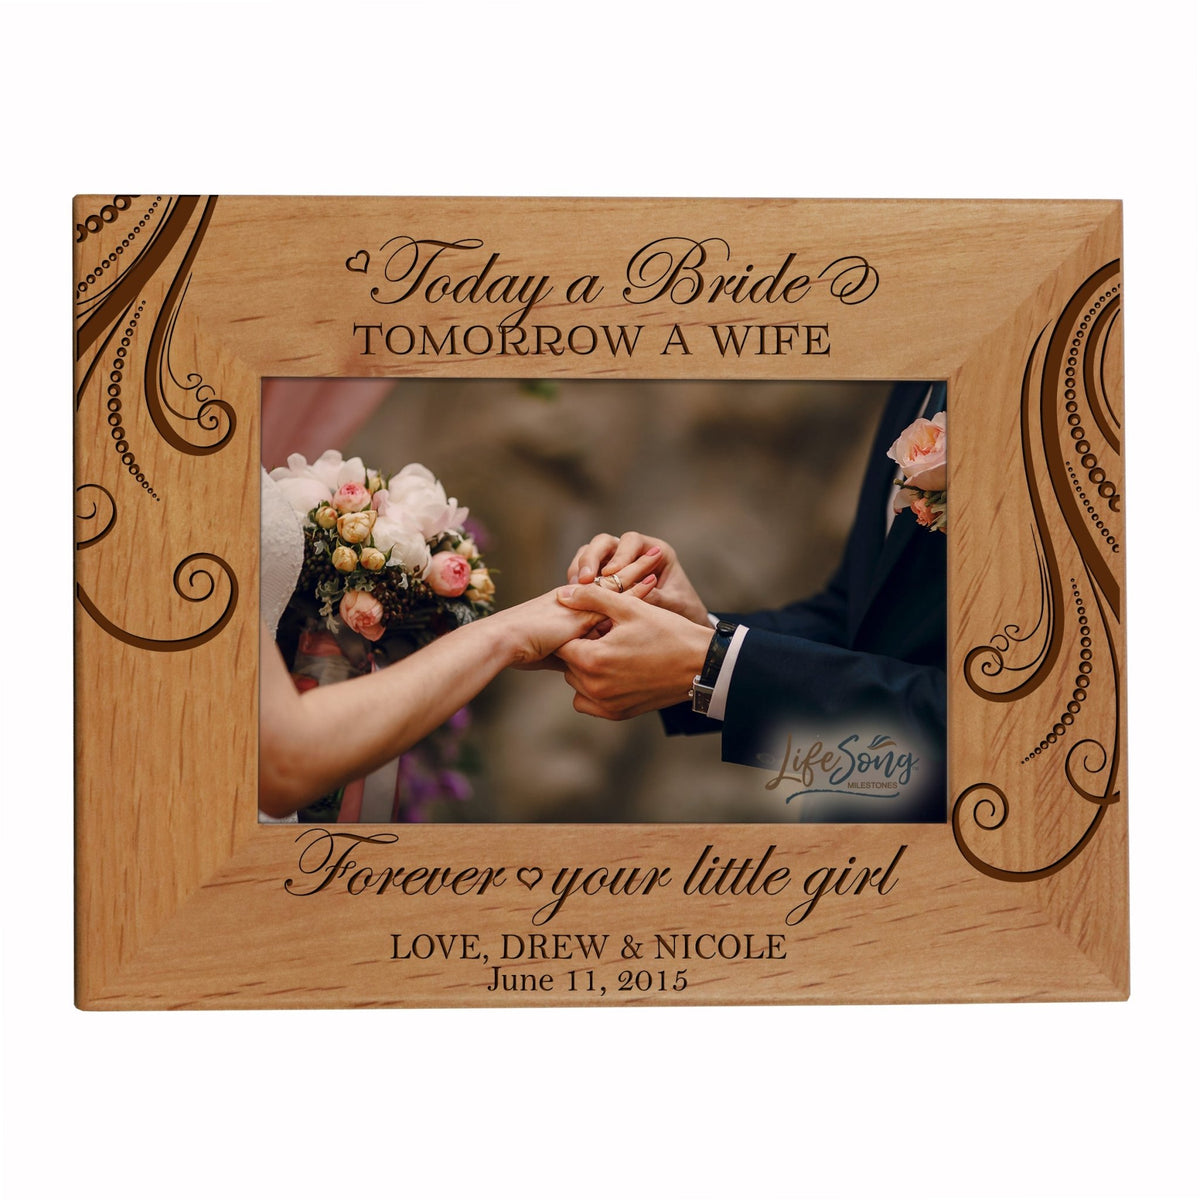 Personalized Wooden Marriage Picture Frames - Today a Bride - LifeSong Milestones